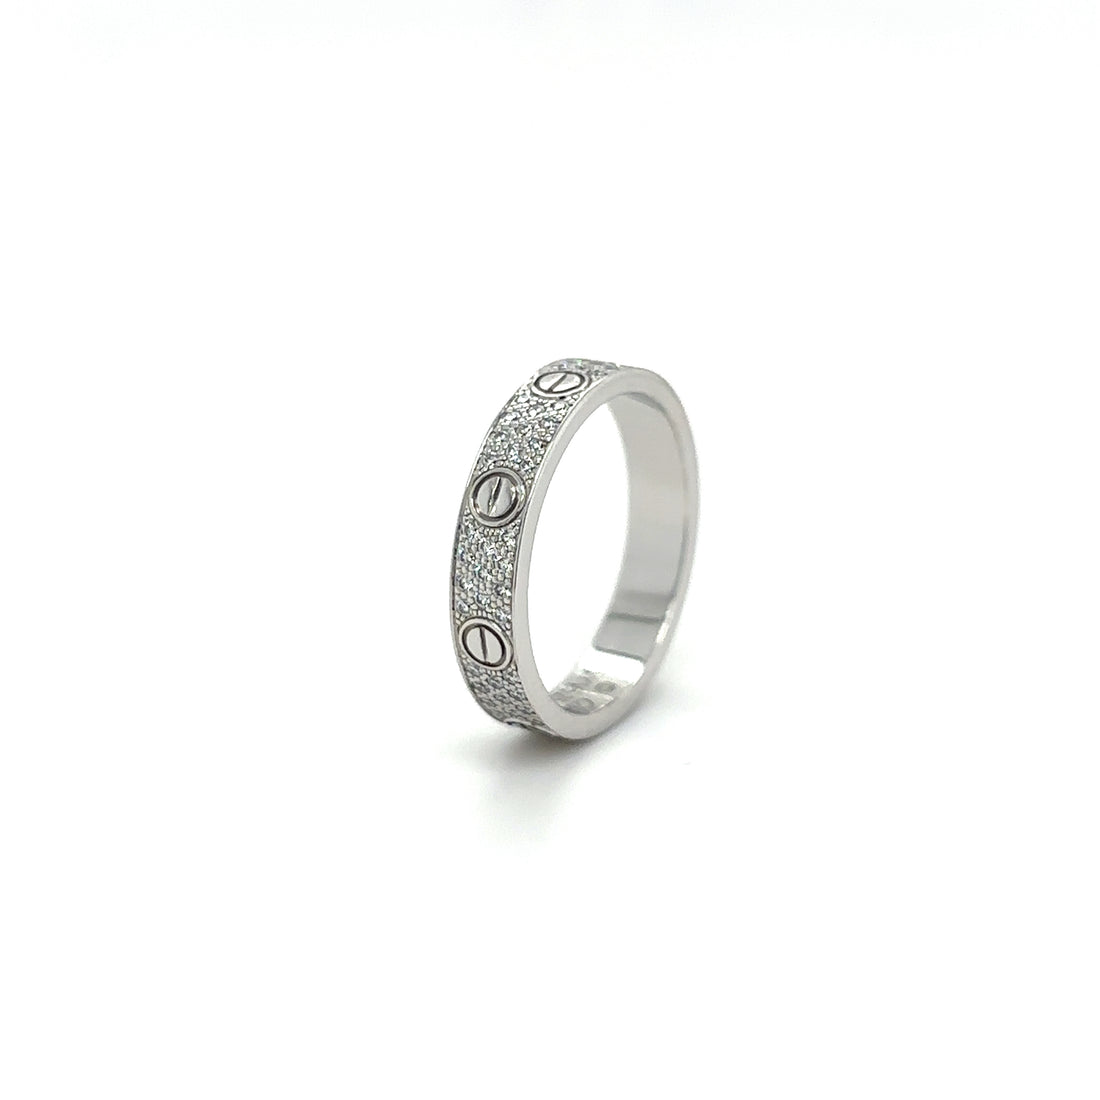 Cartier 18ct White Gold Love Wedding Band Diamond Paved Ring